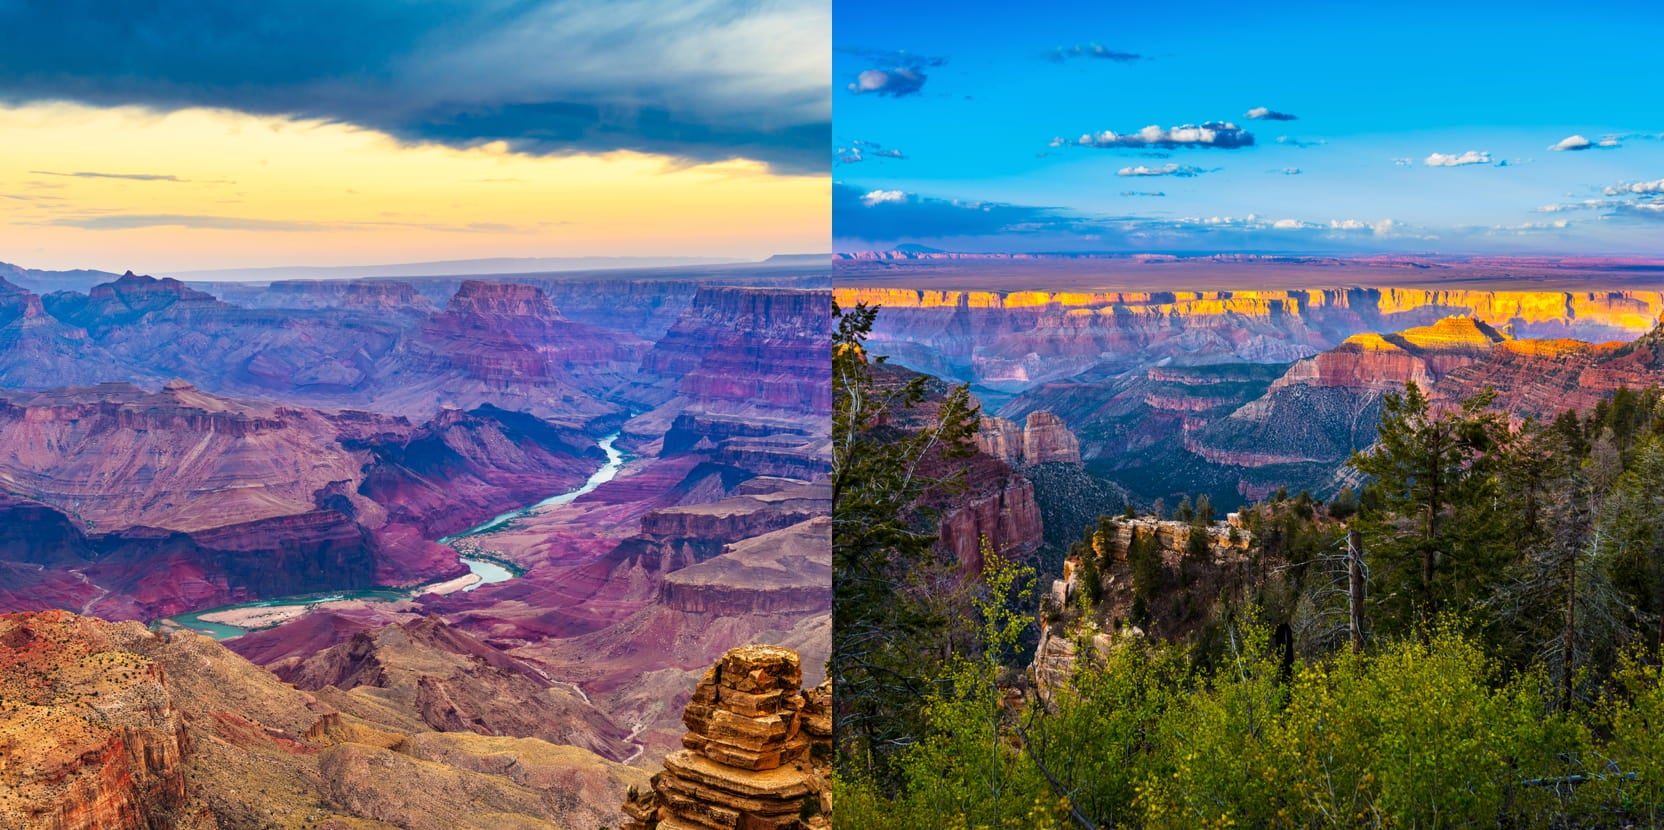 Which is better the North or South Rim?